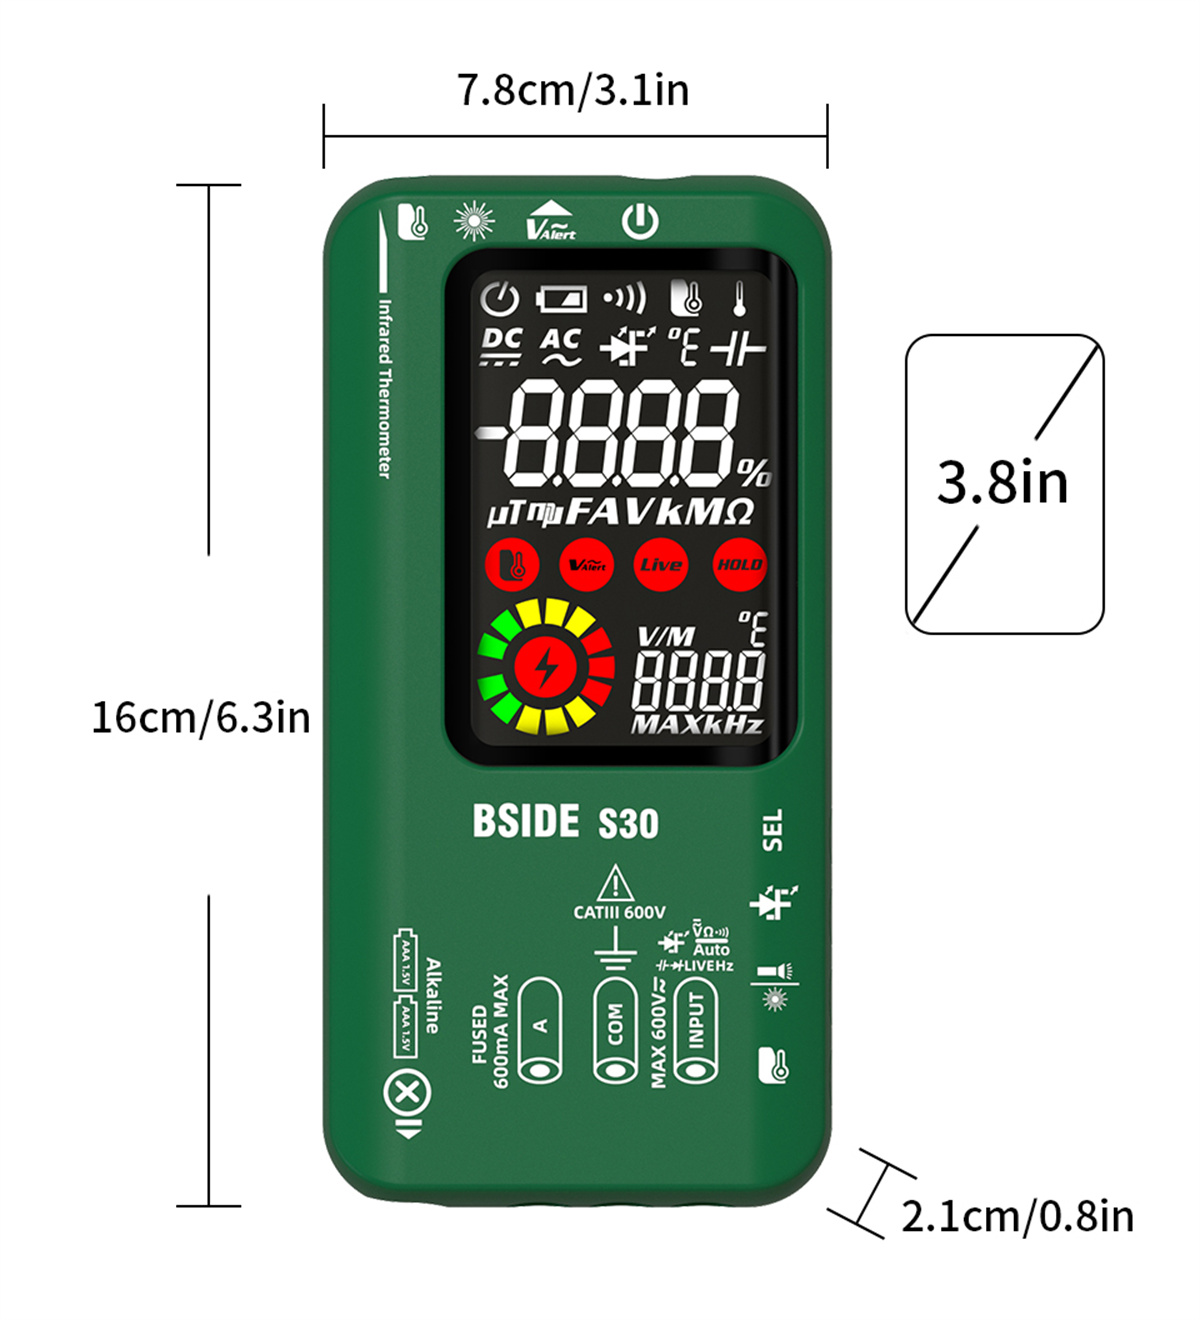 BSIDE S30 Smart Multimeter with Infrared Temperature Measurement Color Screen High Precision Voltage Current Resistance Capacitance Tester